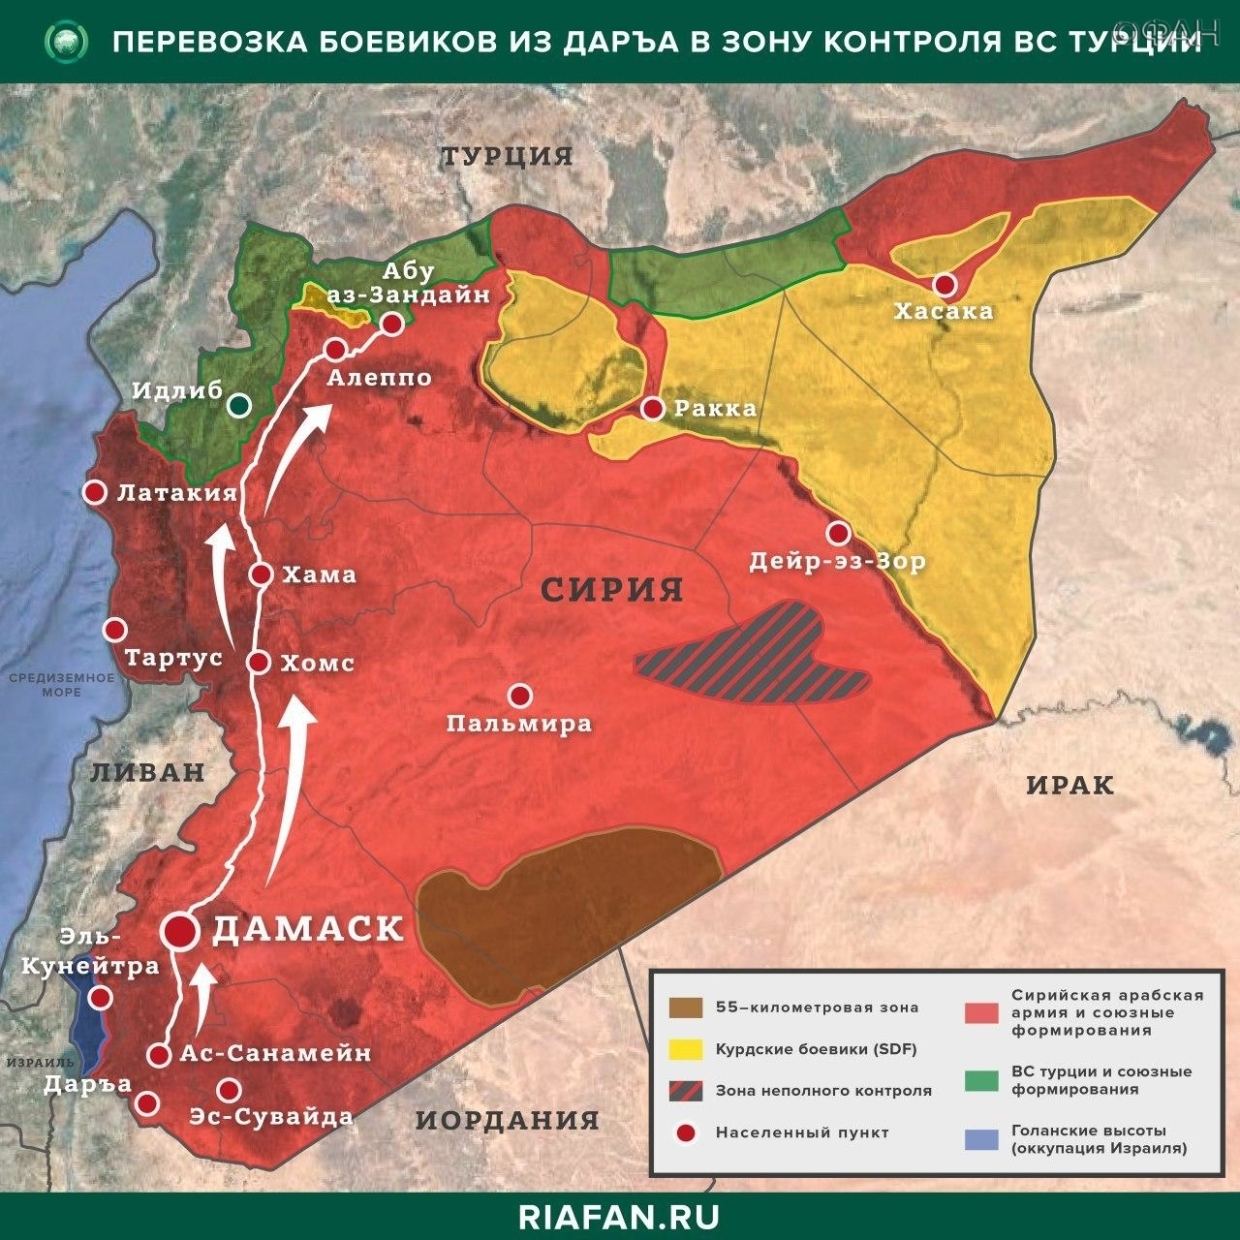 Syrian digest: a summary of the events in Syria for 3 March of 22.00